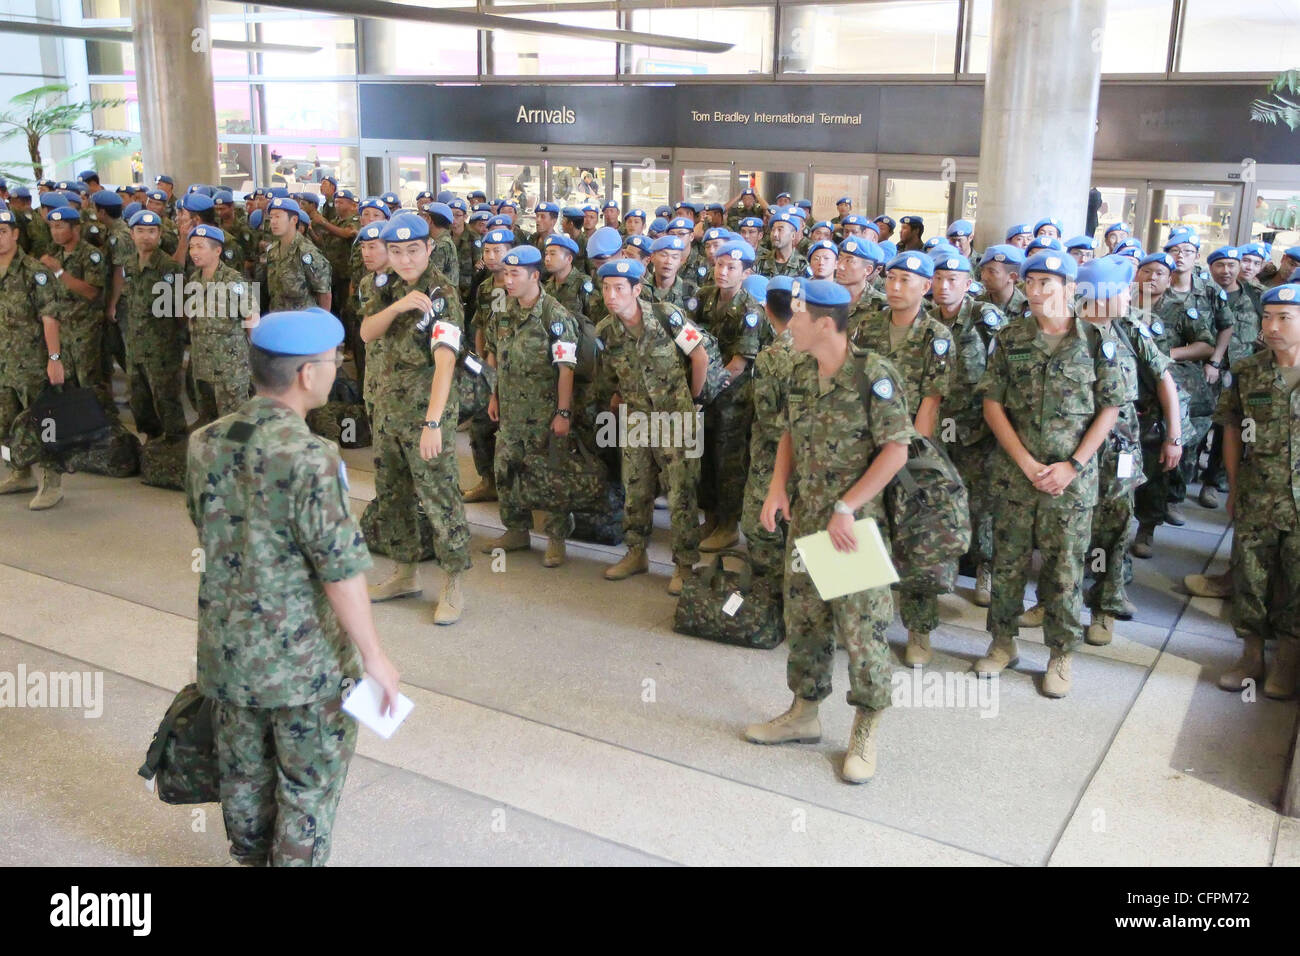 A UN peacekeeping force from Japan arriving at LAX after a 6 month deployment in Haiti Los Angeles, USA - 09.02.11 Stock Photo